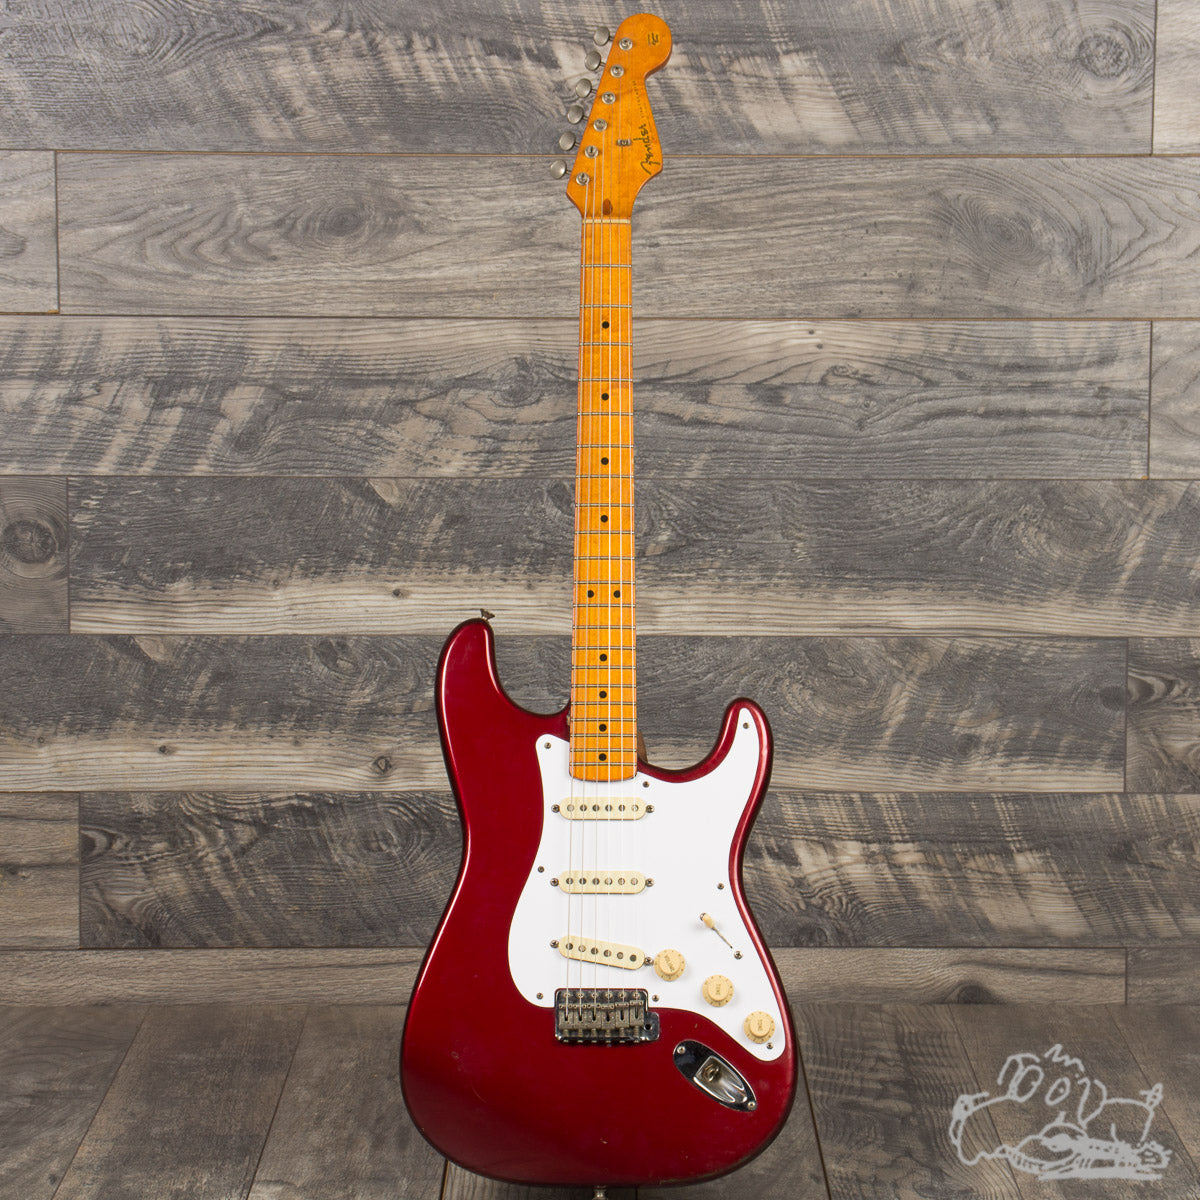 1988 Fender American Vintage Reissue '57 Stratocaster - Candy Apple Red